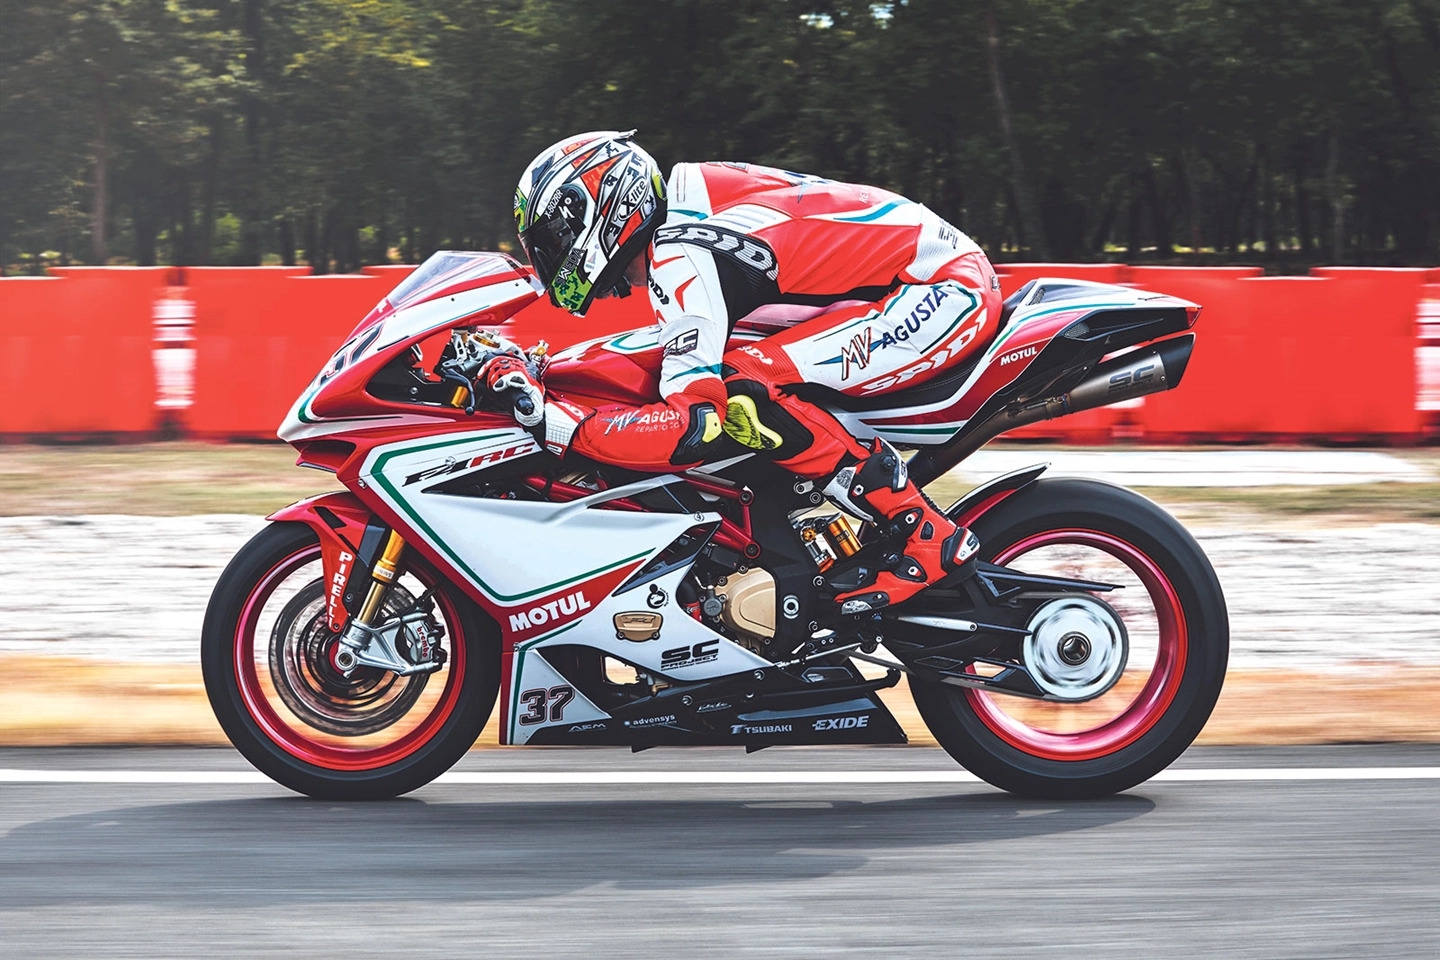 mv agusta f4 rc bike one of the fastest motorcycles